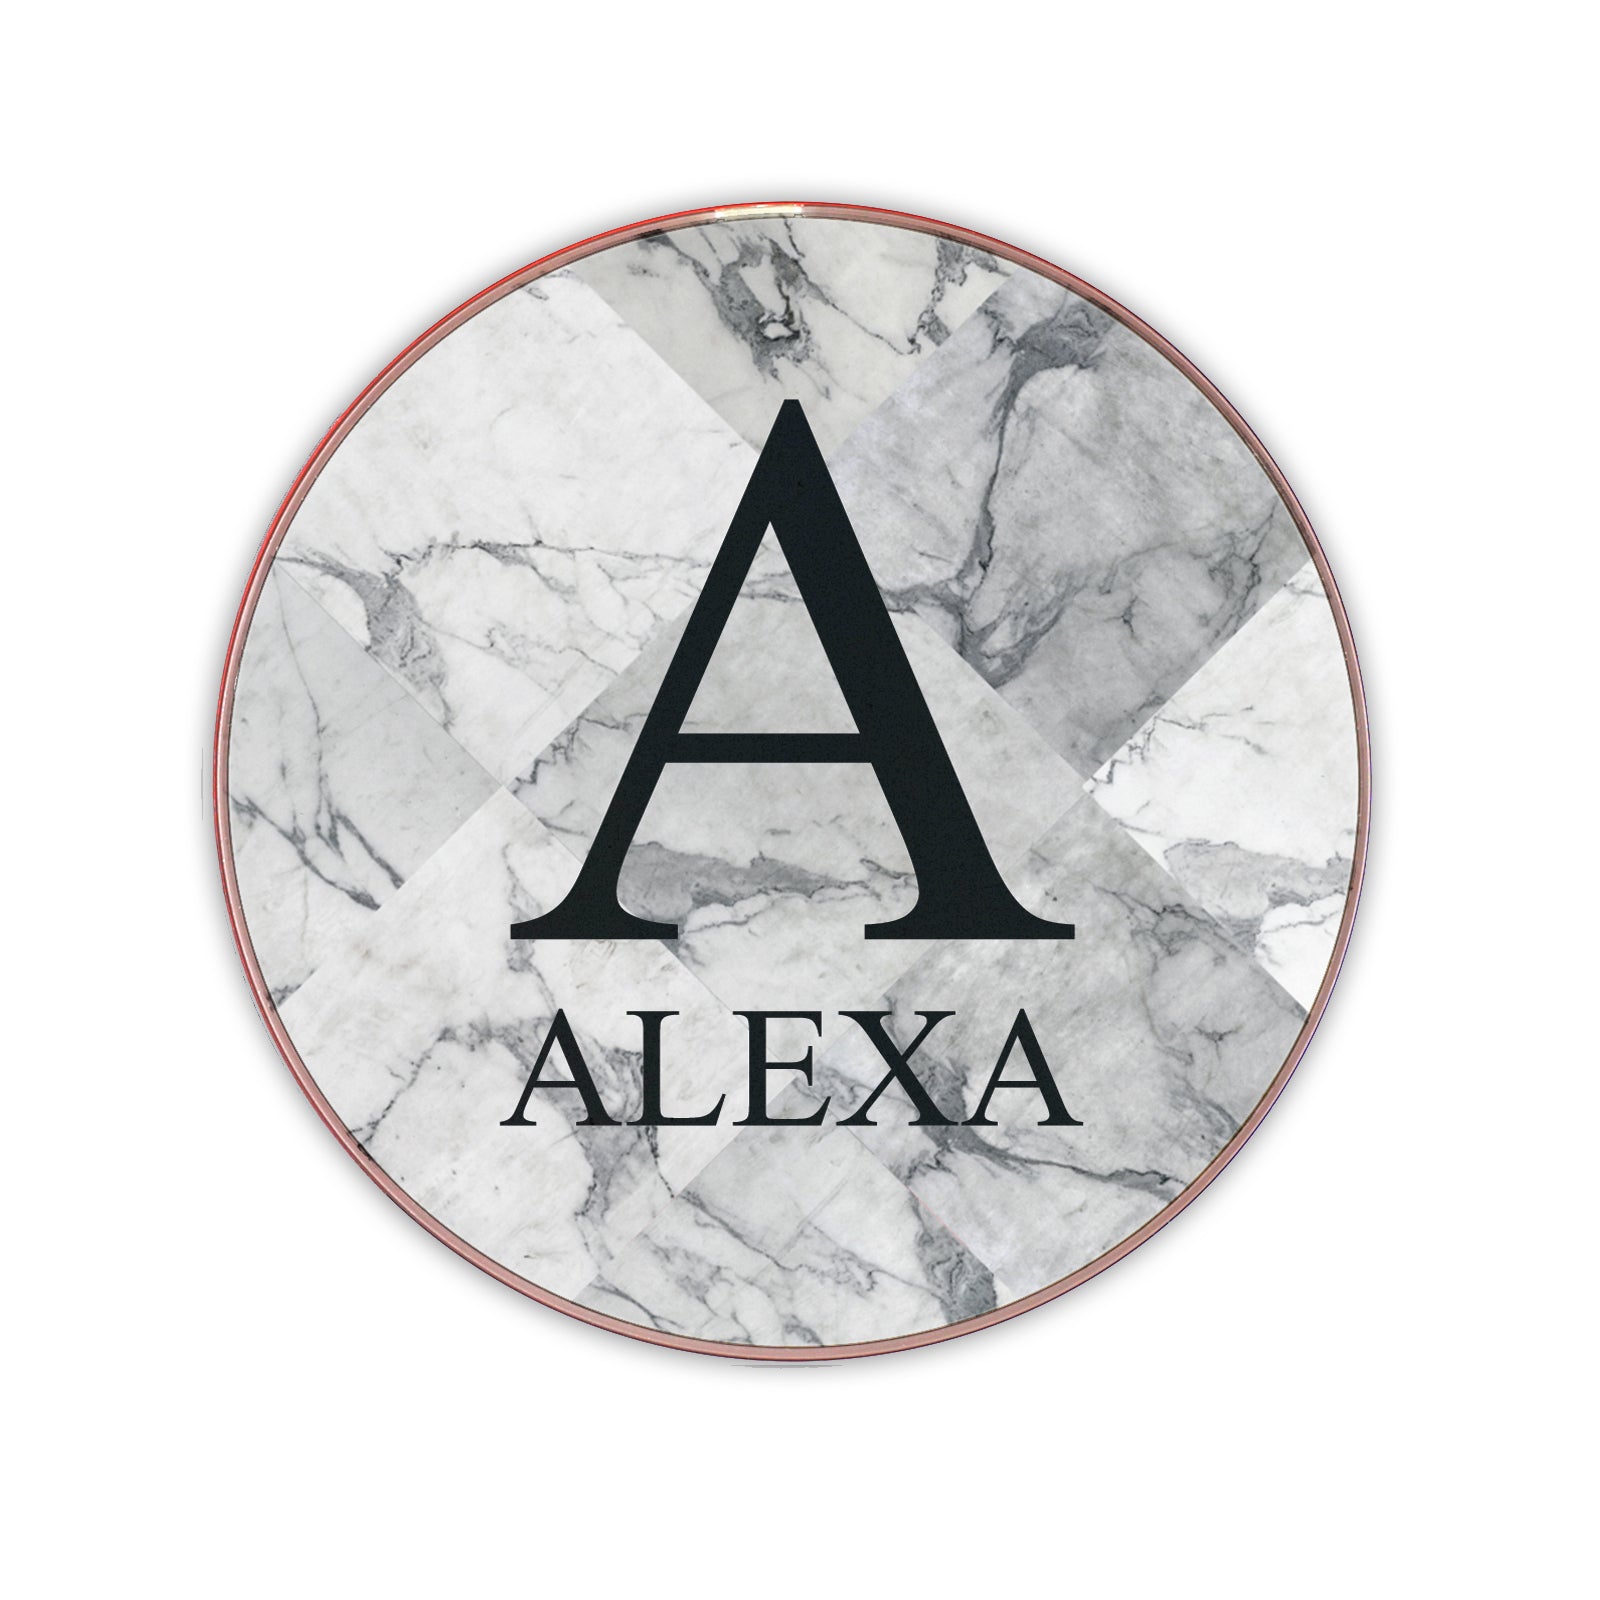 Personalised Wireless Charger with Traditional Monogram and Text on Grey Marble